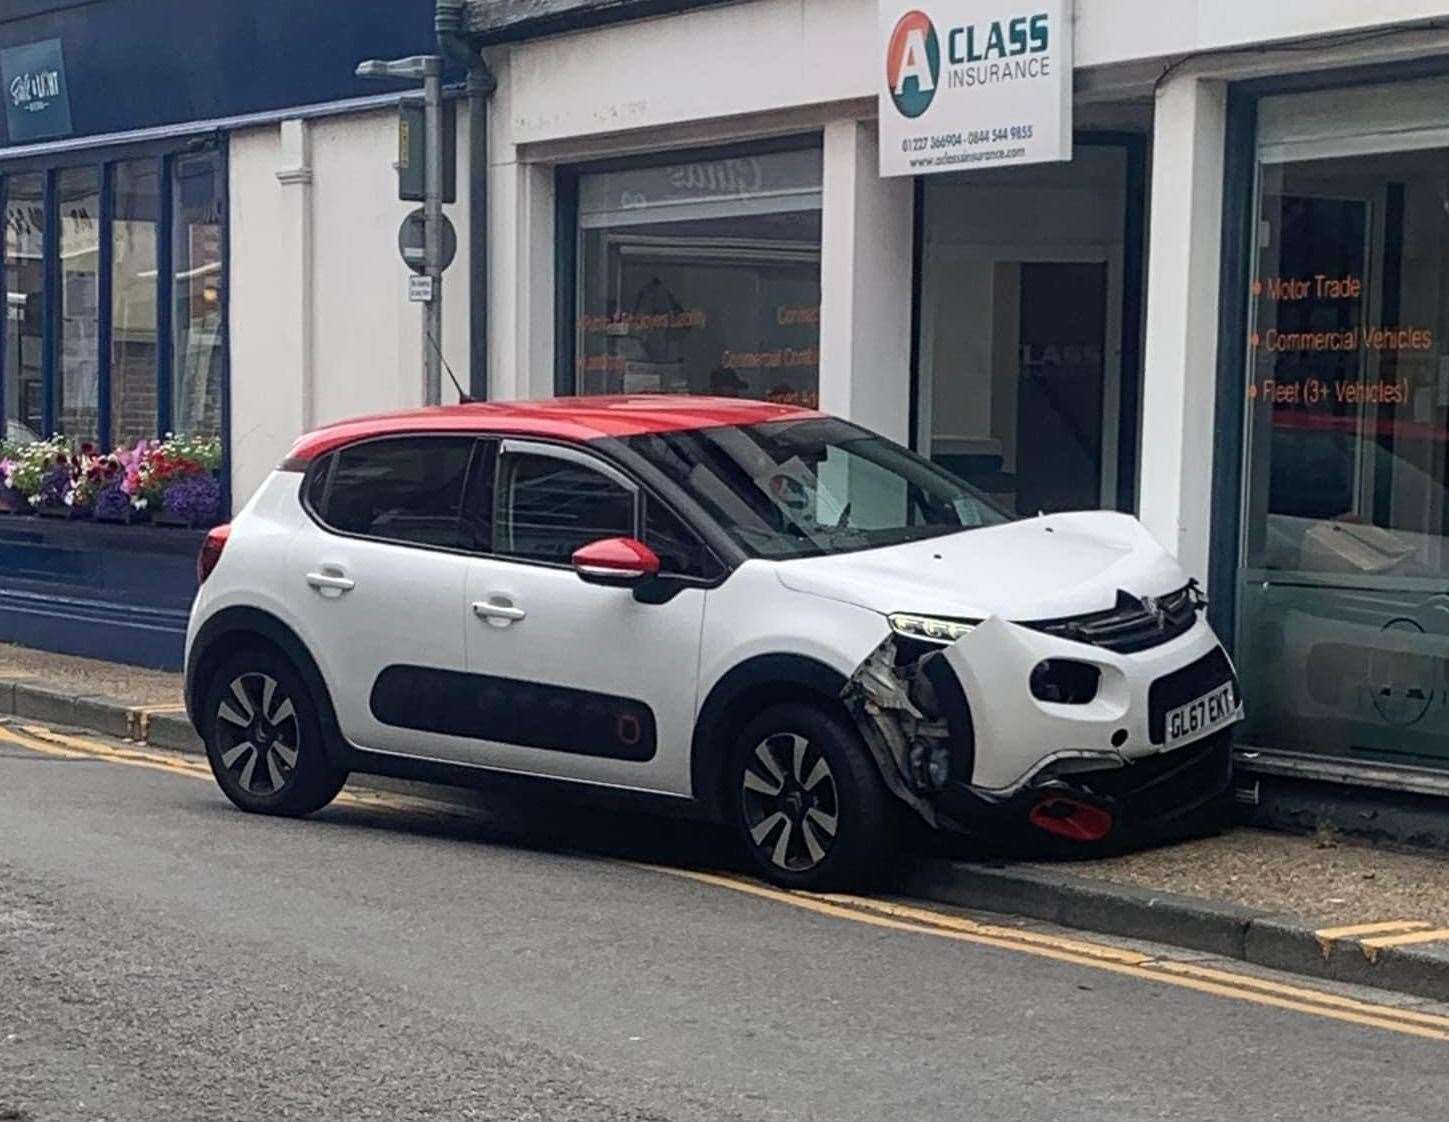 A Citroen has been left badly damaged following a collision into a building in Herne Bay. Picture: Sue Baylis